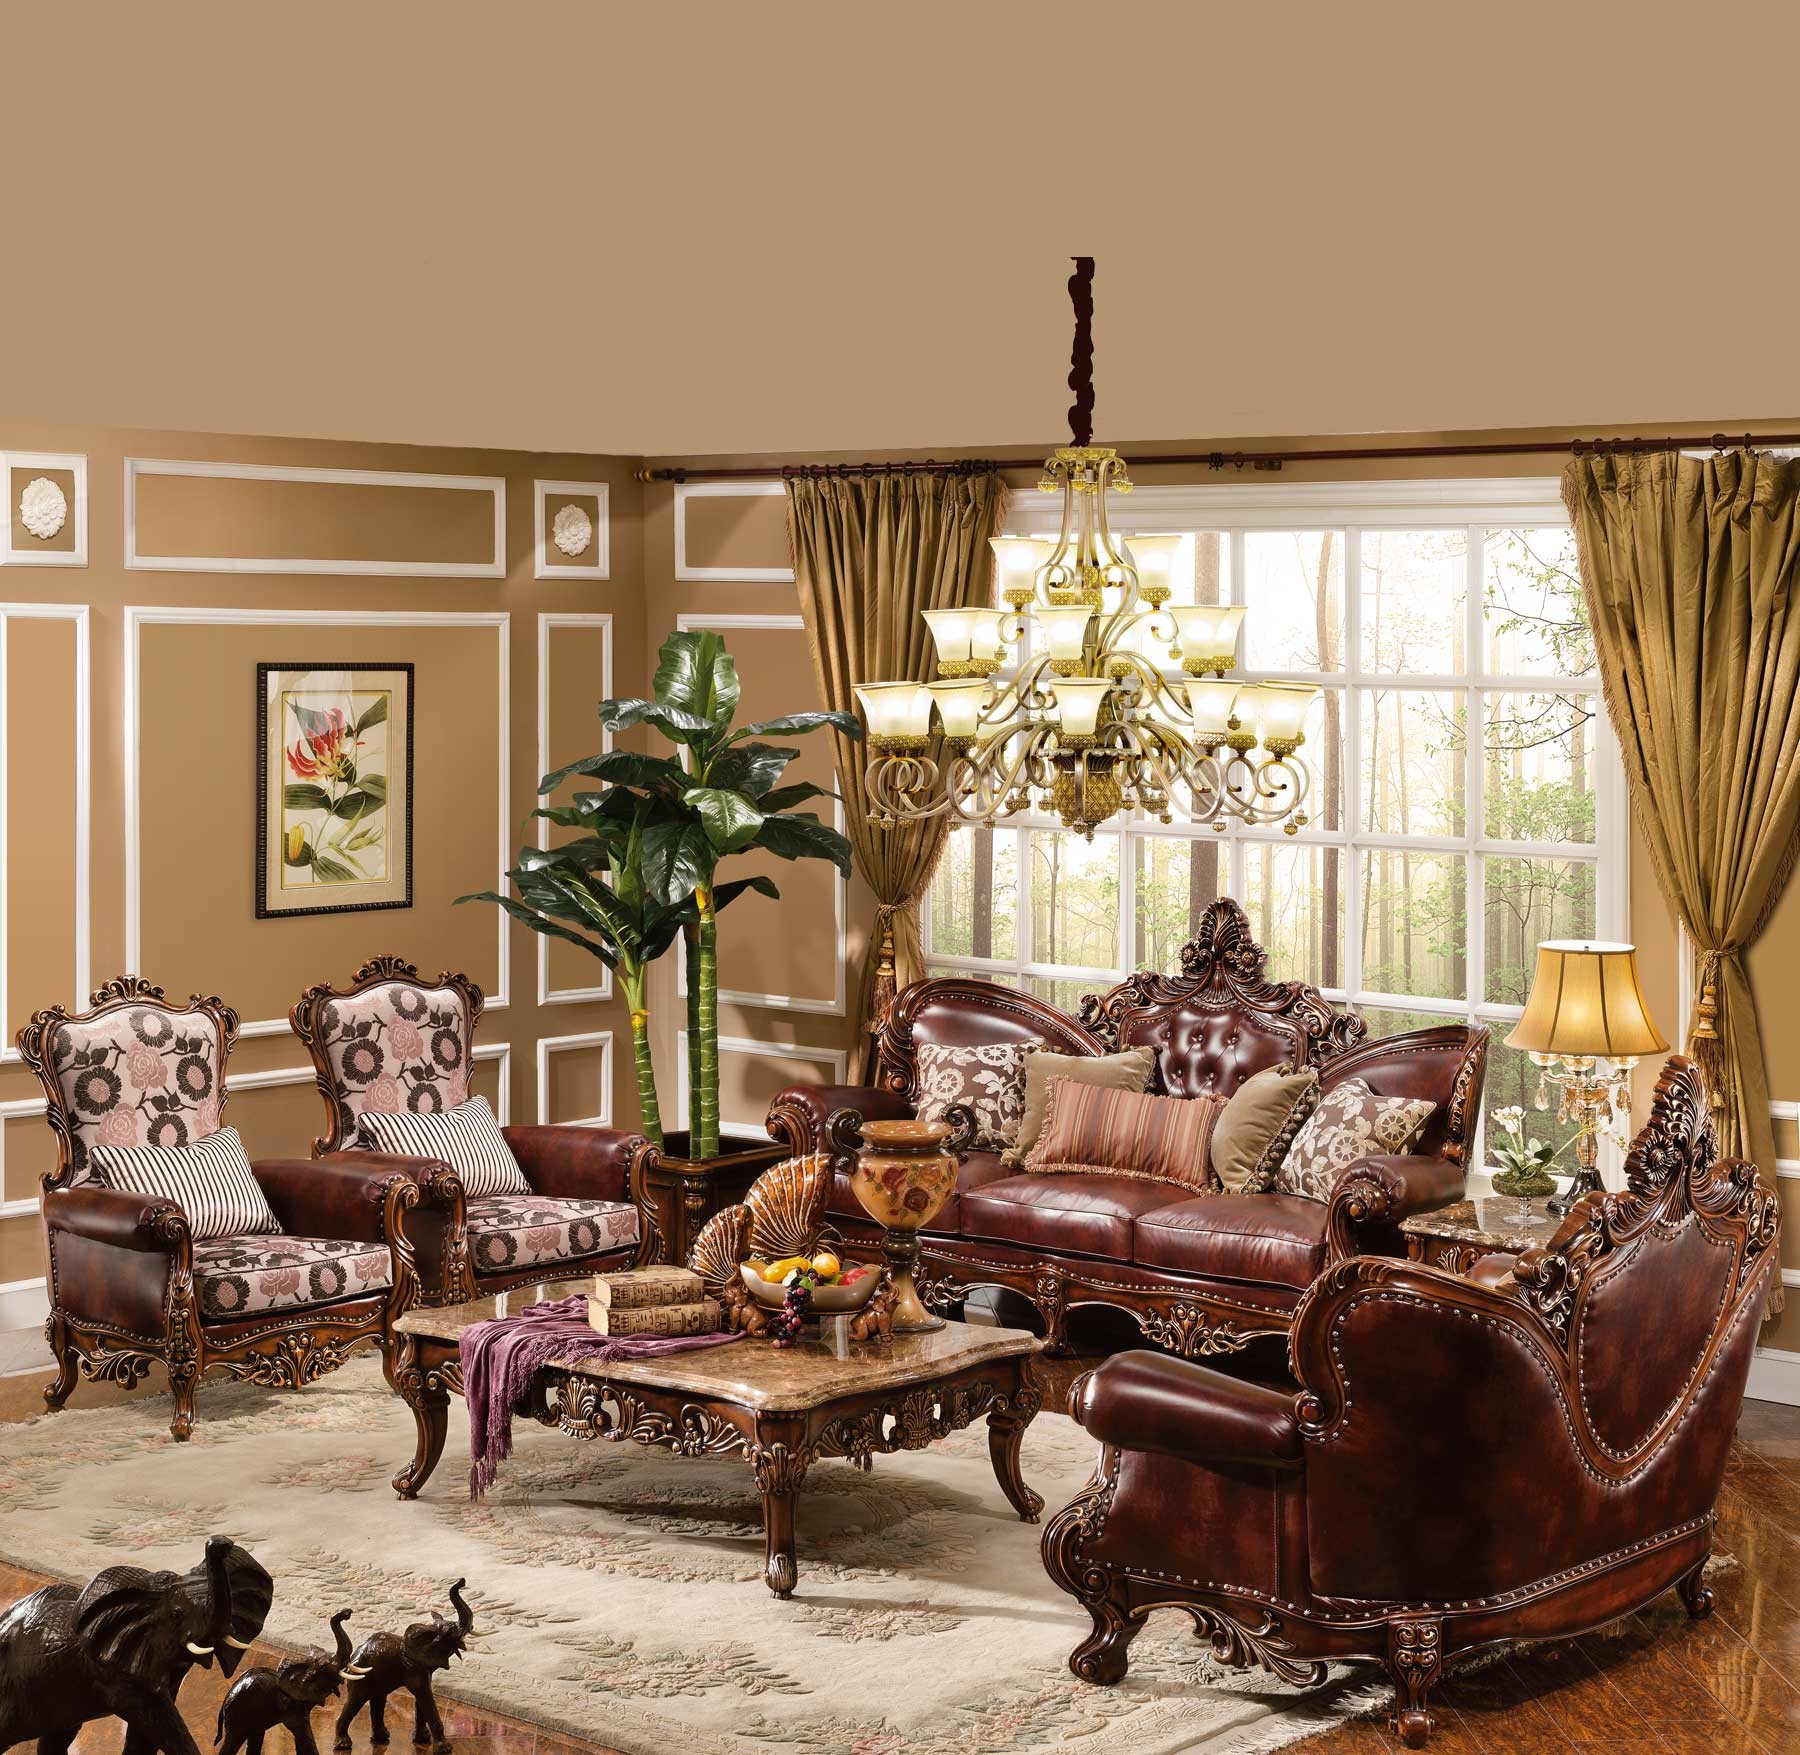 Alexia 6-pc Living Room Set shown in Antique Cherry finish